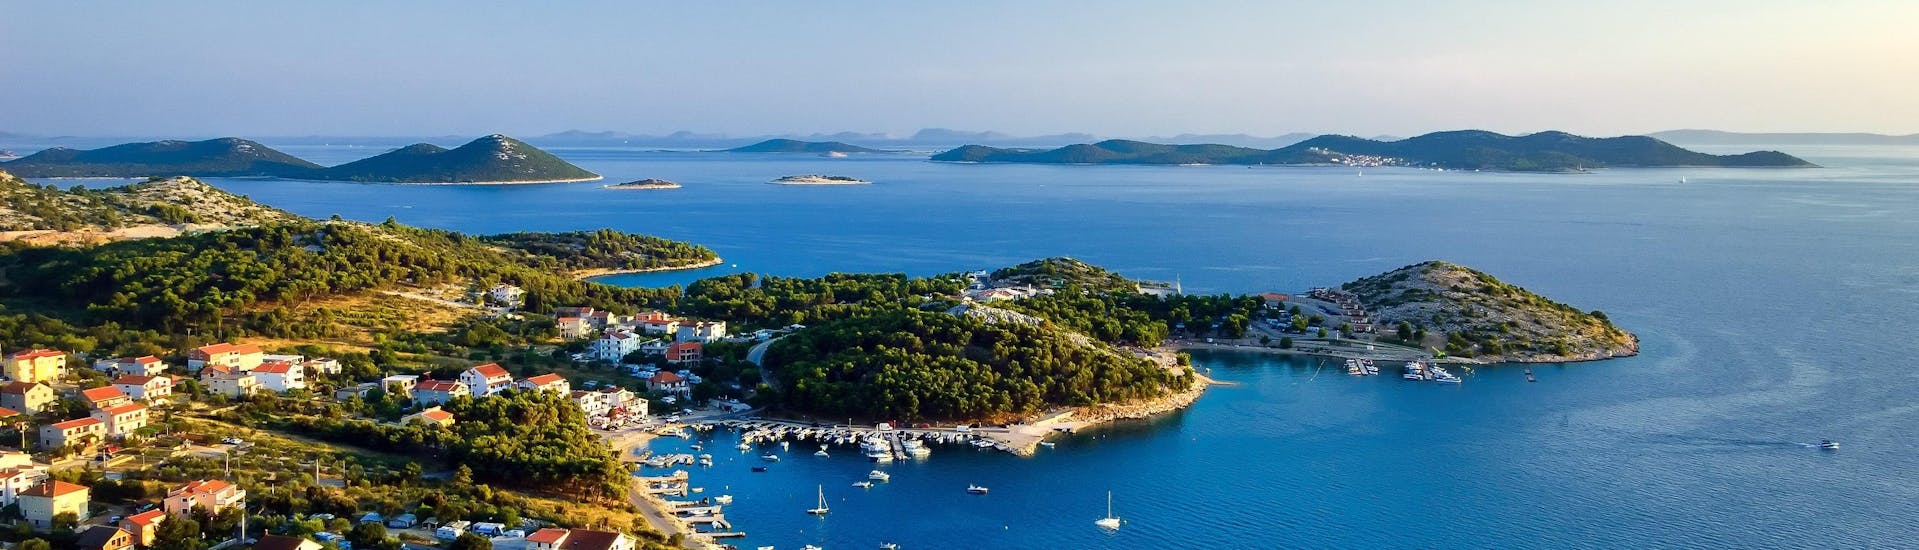 An image of the famous archipelago visitors can witness on a boat trip in the Kornati National Park.